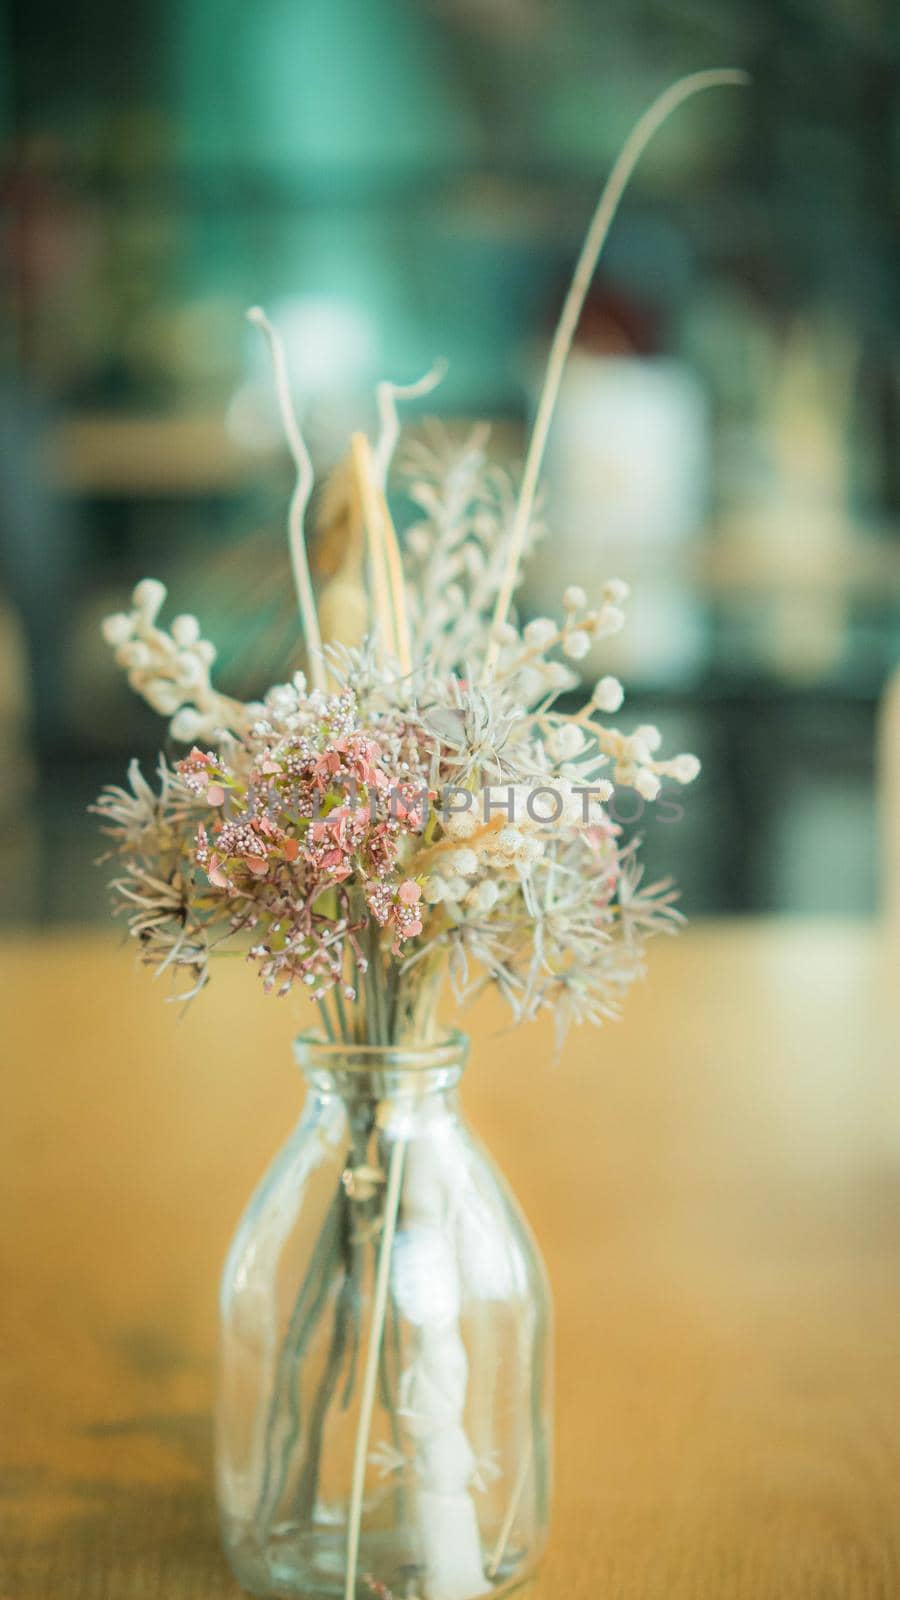 Bunch of dried flowers in a glass vase on wooden table. by Petrichor